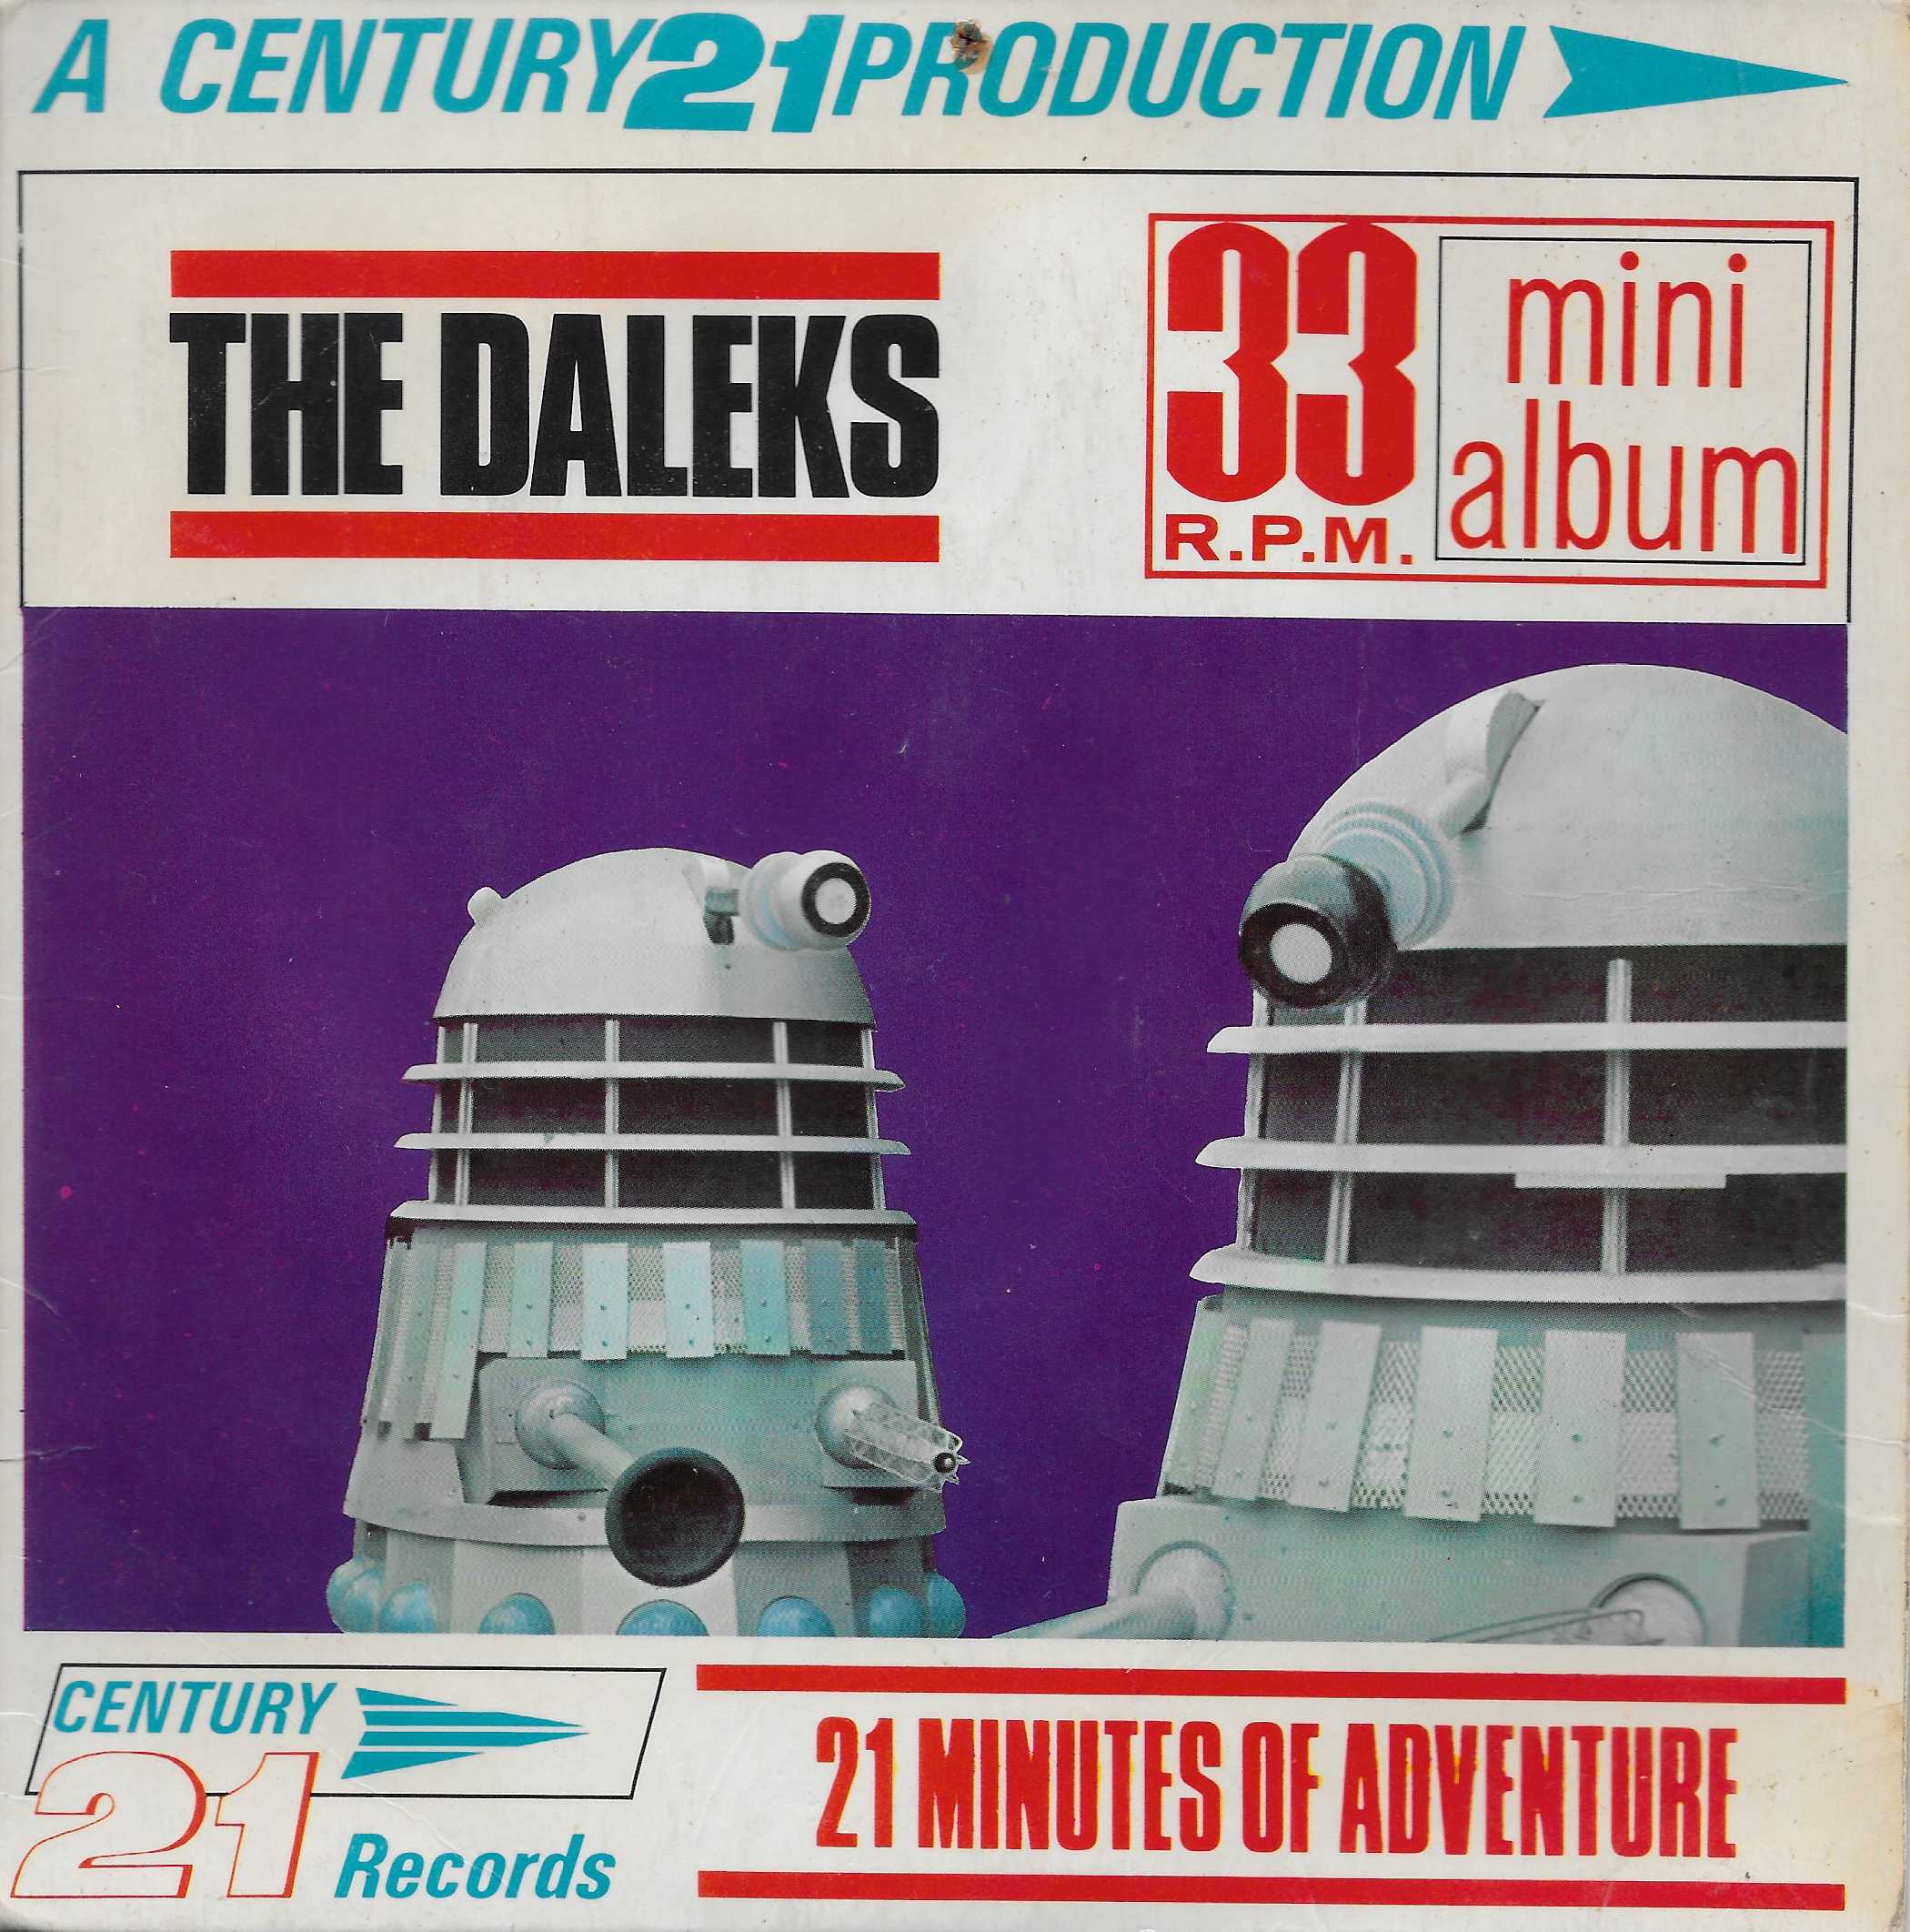 Picture of MA 106 Doctor Who - The Daleks by artist Terry Nation from ITV, Channel 4 and Channel 5 library